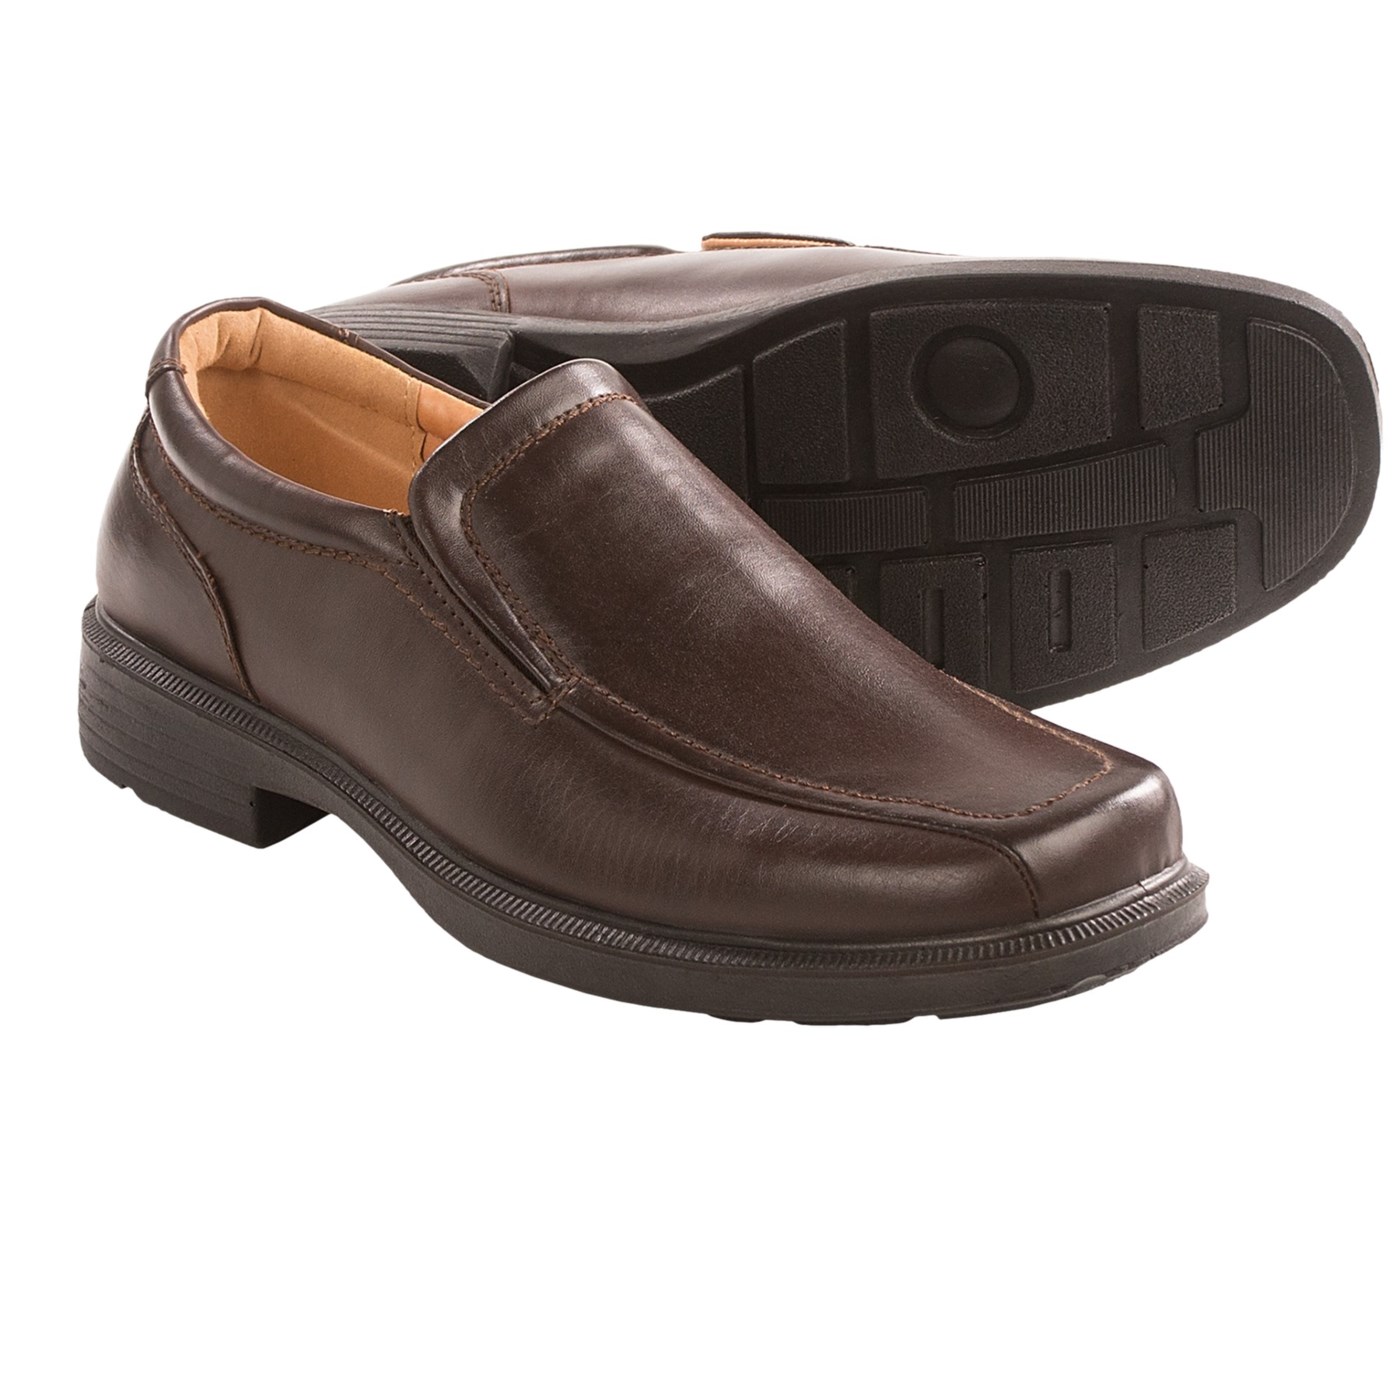 Deer Stags Greenpoint Shoes (For Men) 50